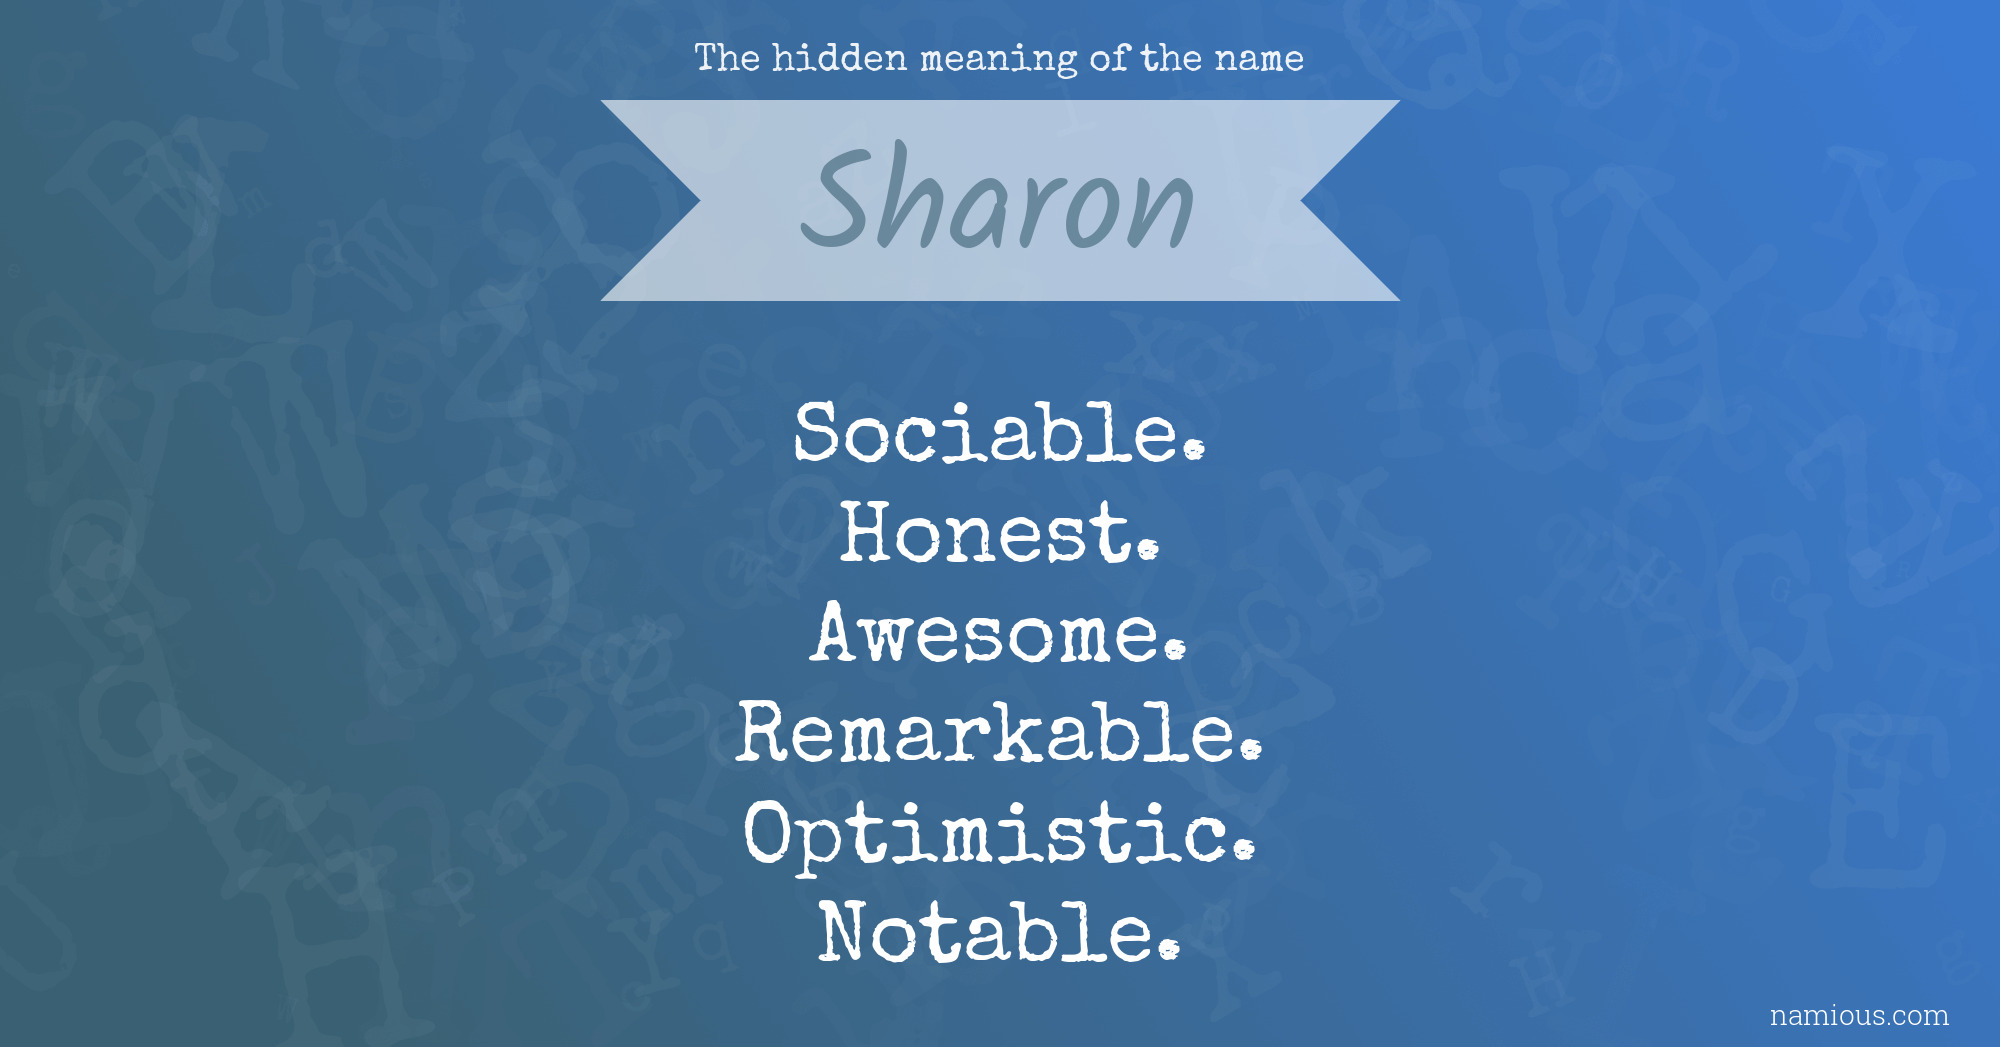 The hidden meaning of the name Sharon